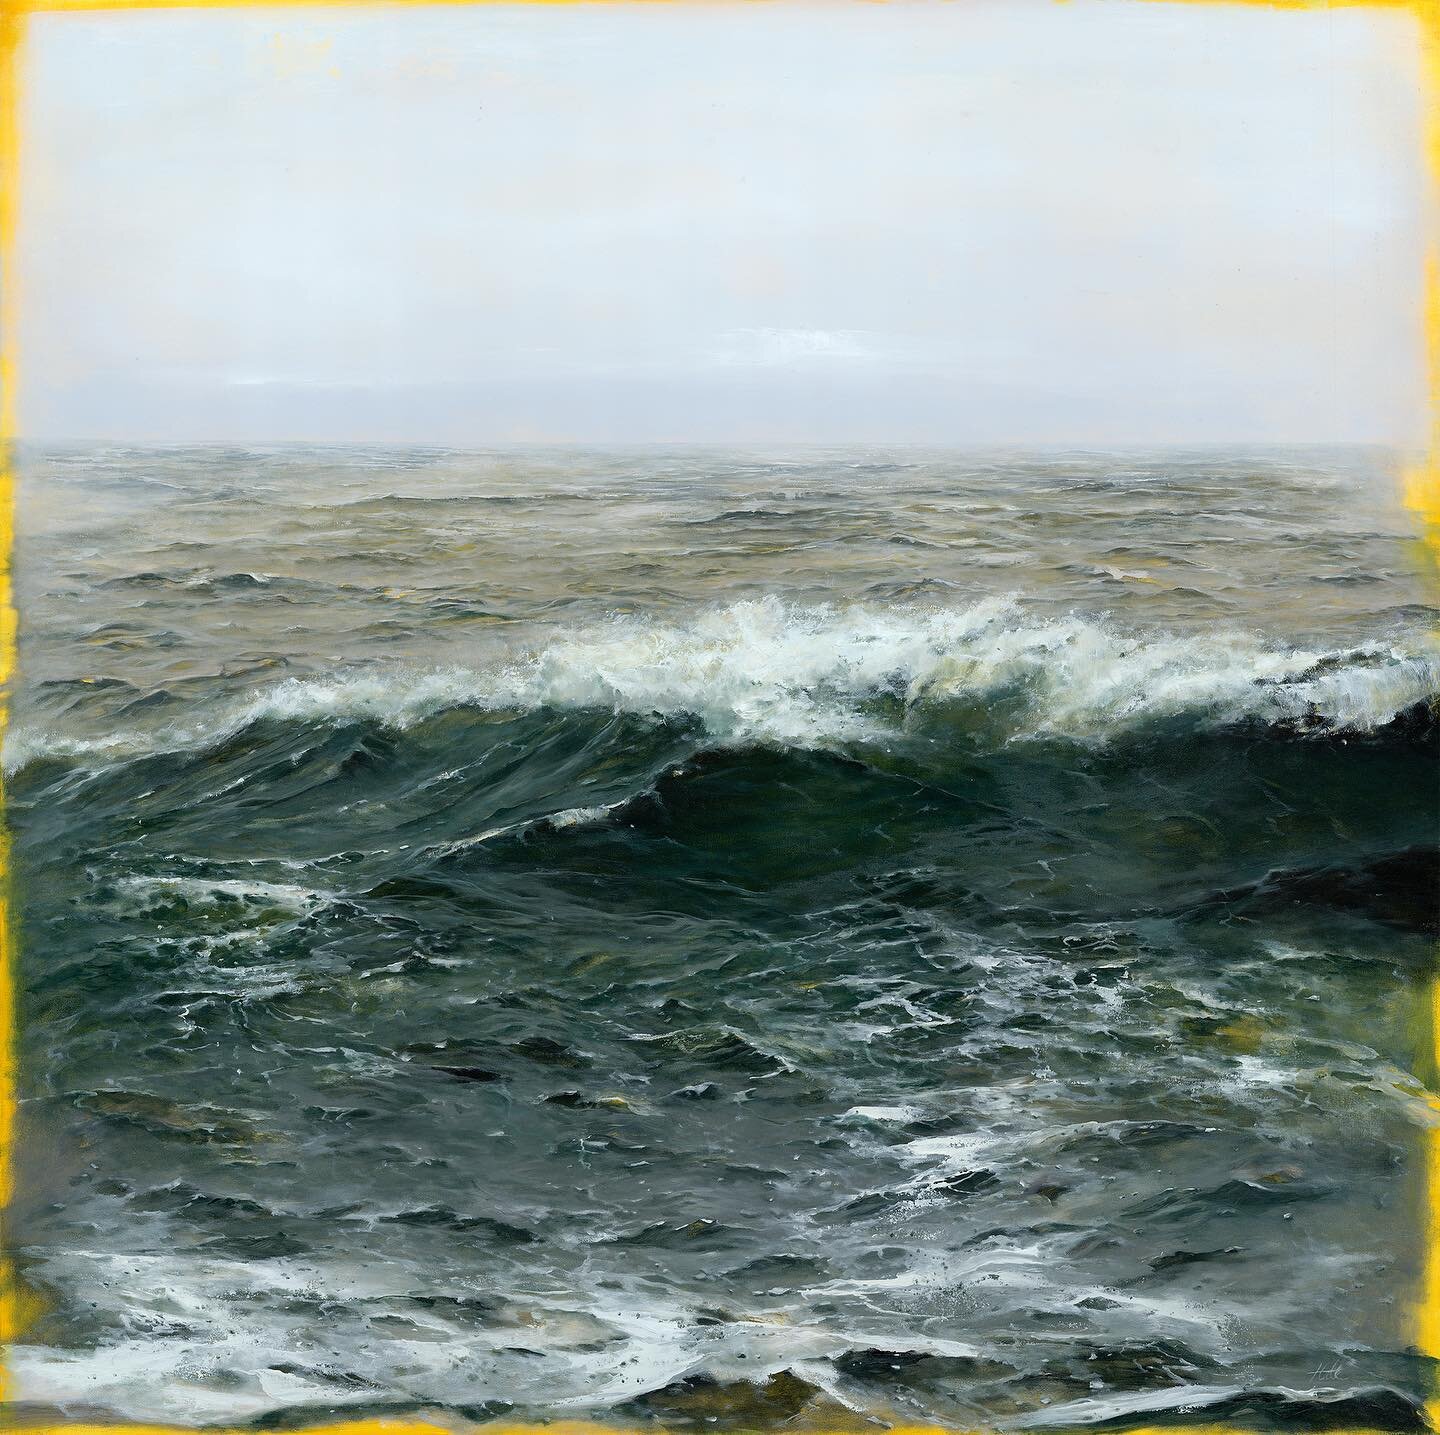 Final Image of &ldquo;A Feeling We Once Had&rdquo; 30x30 oil panel. This painting sold to an amazing collector and I can&rsquo;t wait for them to see it in person. #artcollectors #artforyourhome #artwork #seascape #oceanpainting #interiorart #wavepai